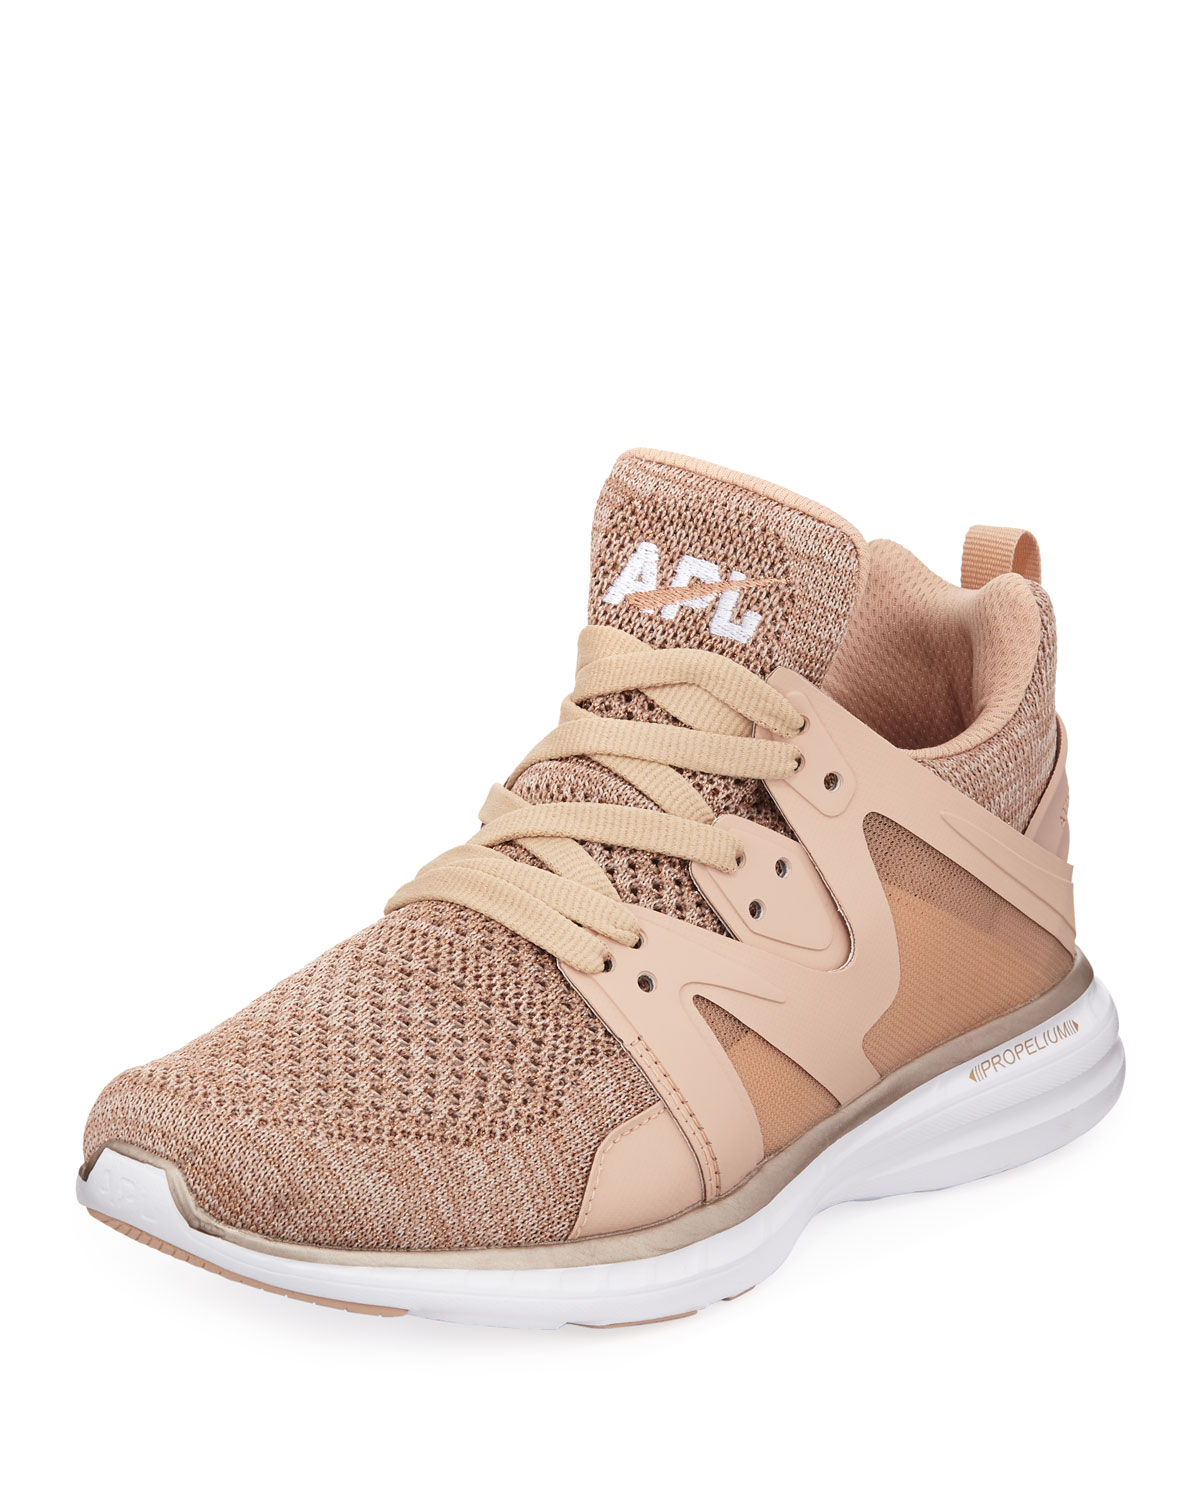 Athletic Propulsion Labs APL Ascend.. 2 +80 Most Inspiring Workout Shoes Ideas for Women - 5